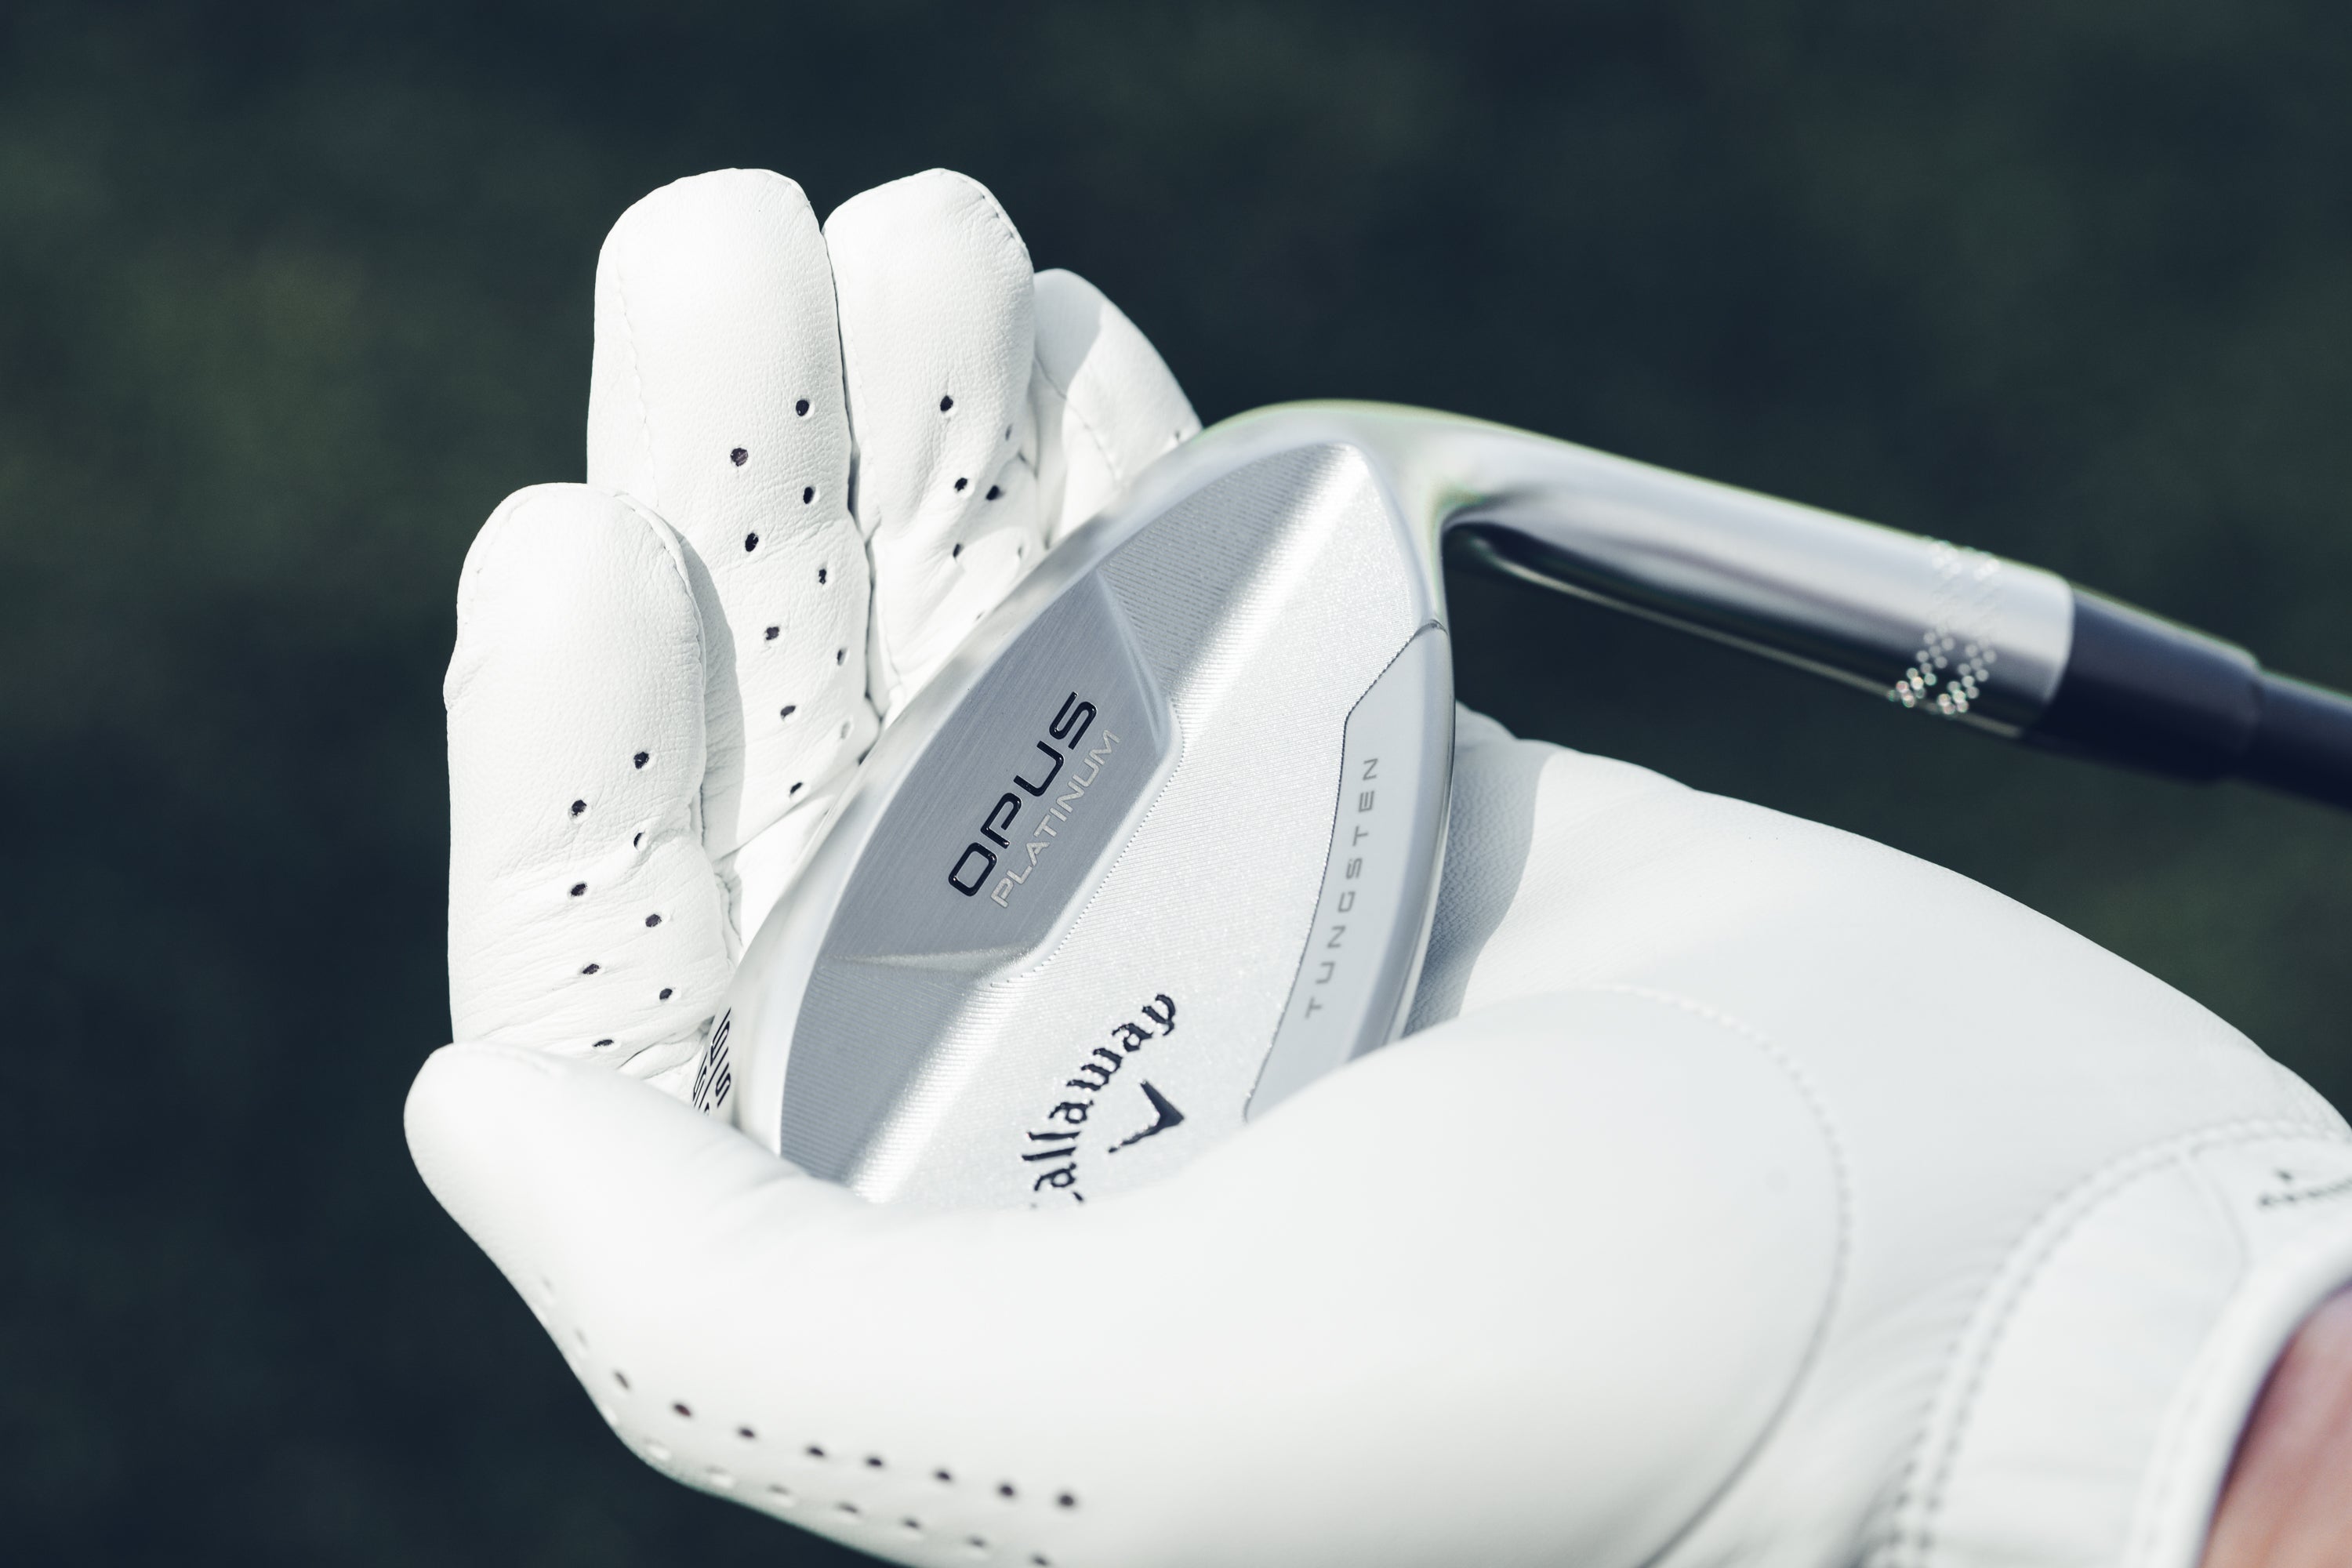 Introducing the New Callaway Opus Wedges and Opus Platinum Wedges